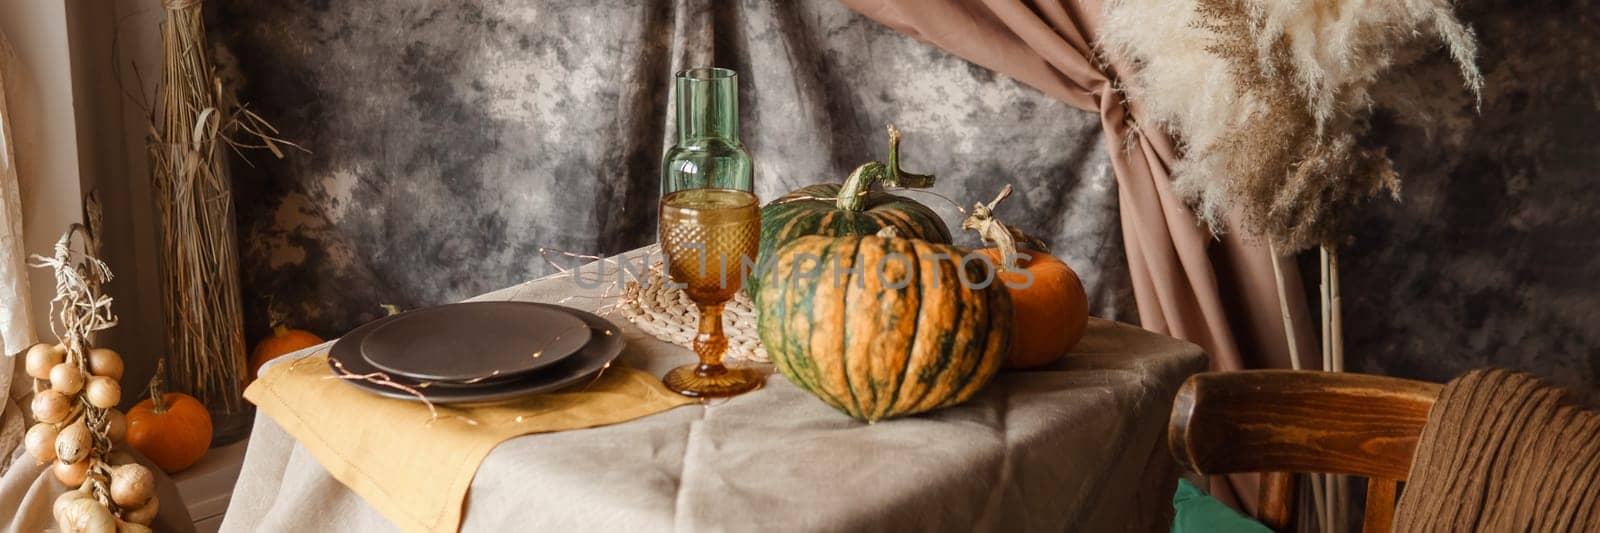 Autumn interior: a table covered with dishes, pumpkins, chair, casual arrangement of Japanese pampas grass. Interior in the photo Studio